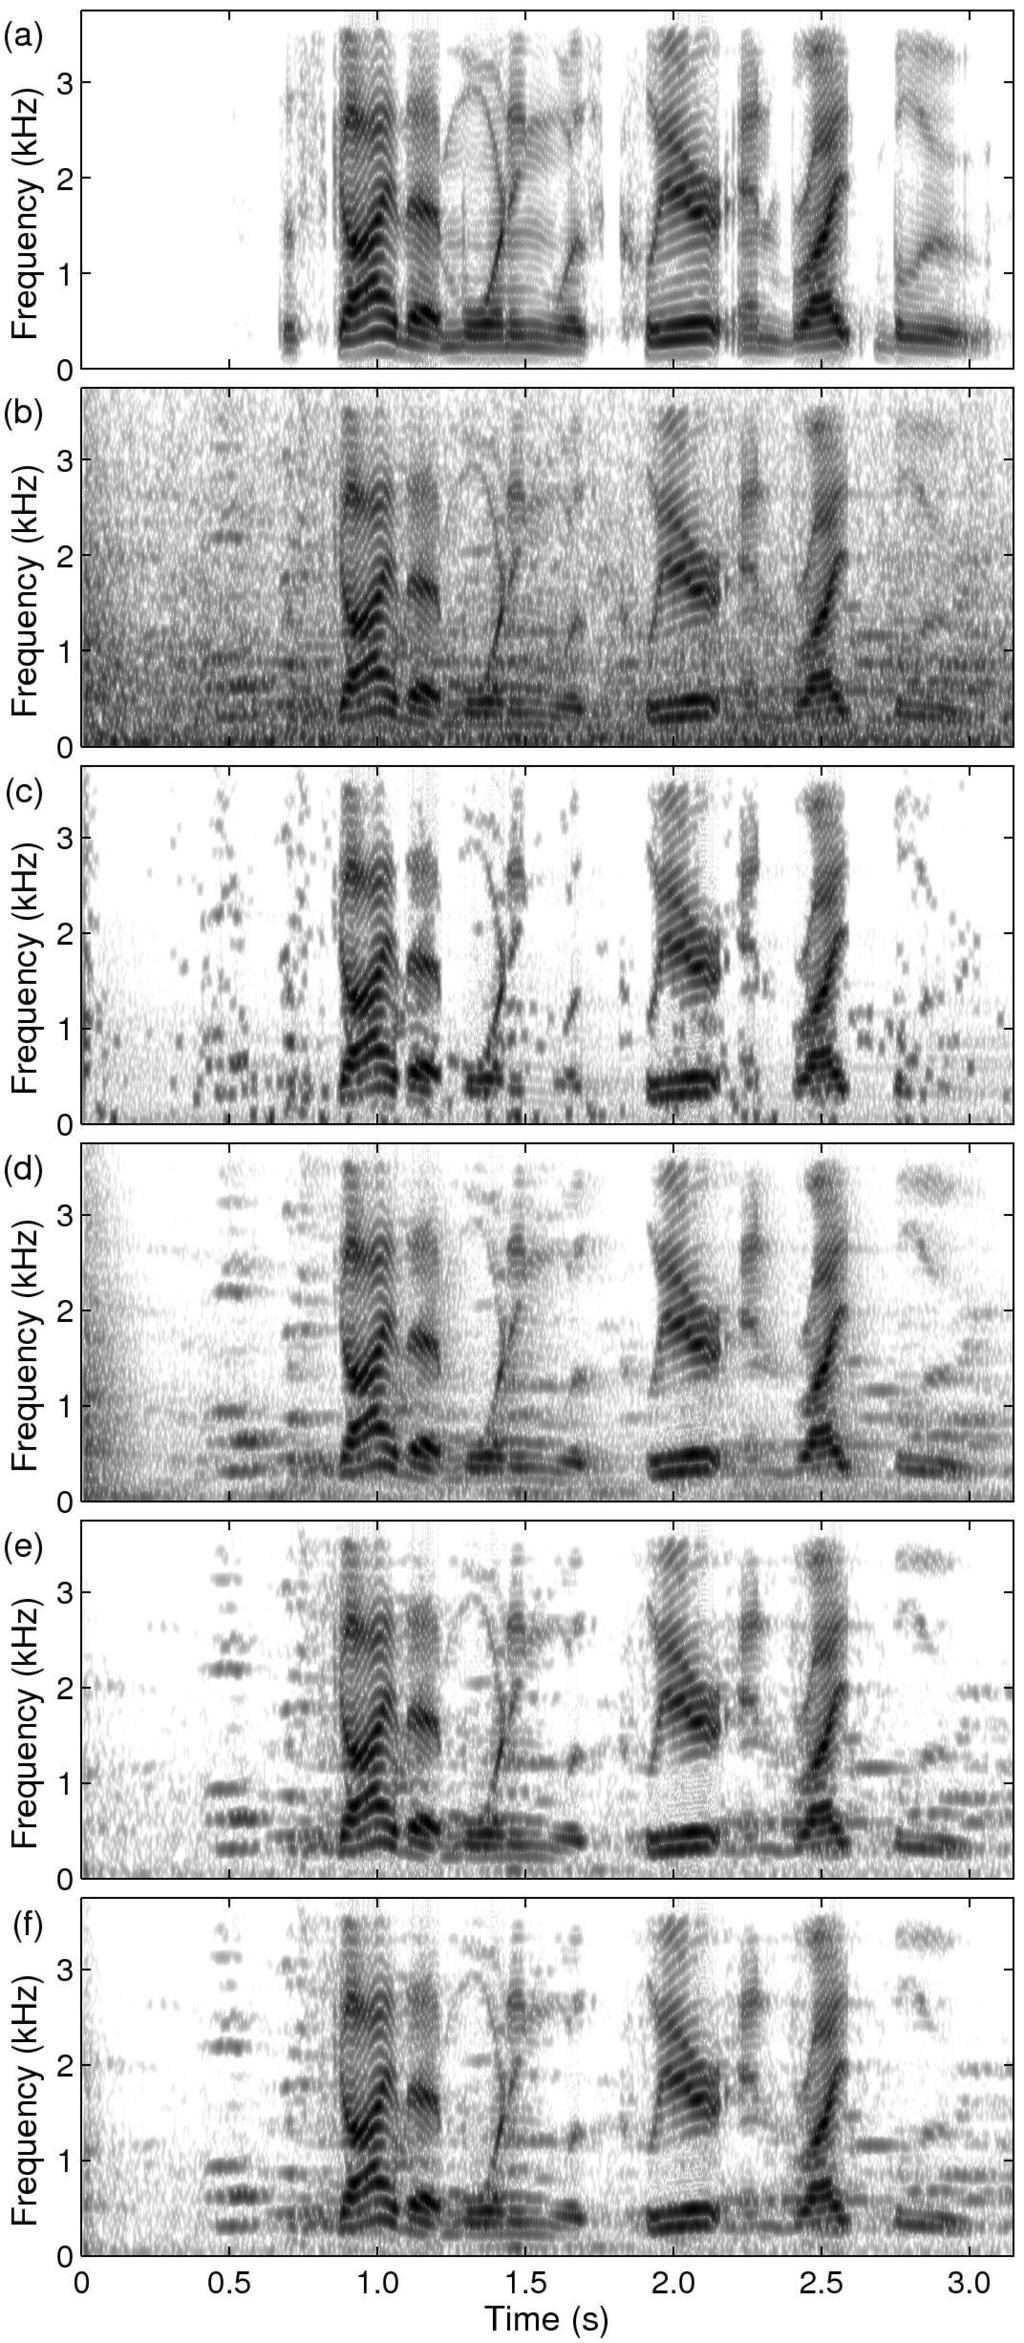 Fig. 15: Spectrograms of sp10 utterance, The sky that morning speech corpus: (a) clean speech (PESQ: 4.50); (b) speech degraded by airport noise at 5 db SNR (PESQ: 2.